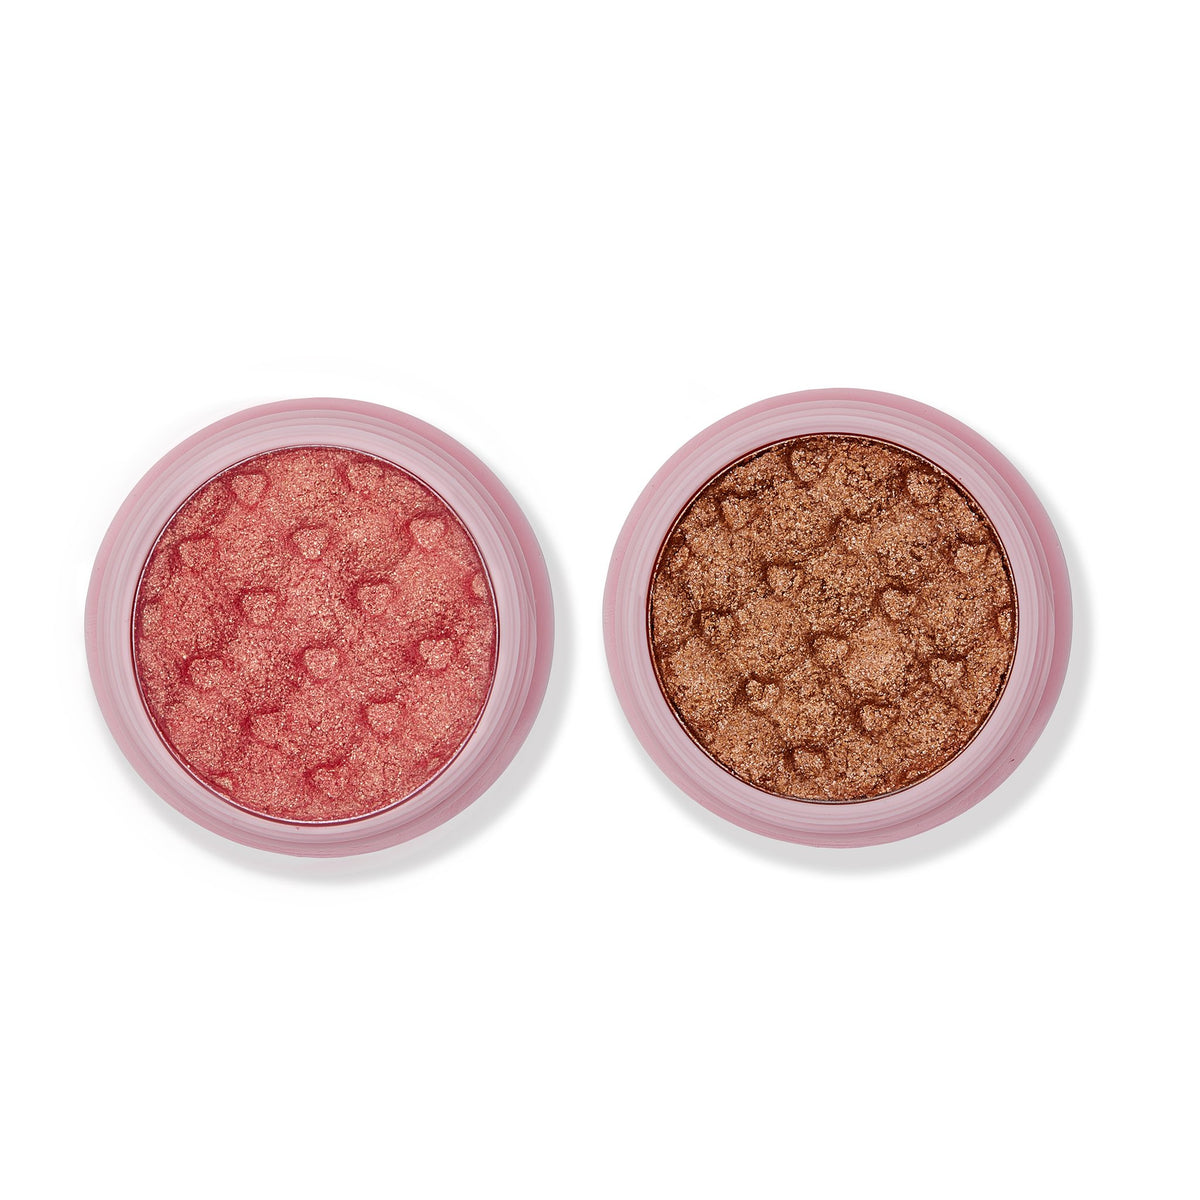 Glimmer Shadow Duo Set - Ace Beaute - YouFomMe